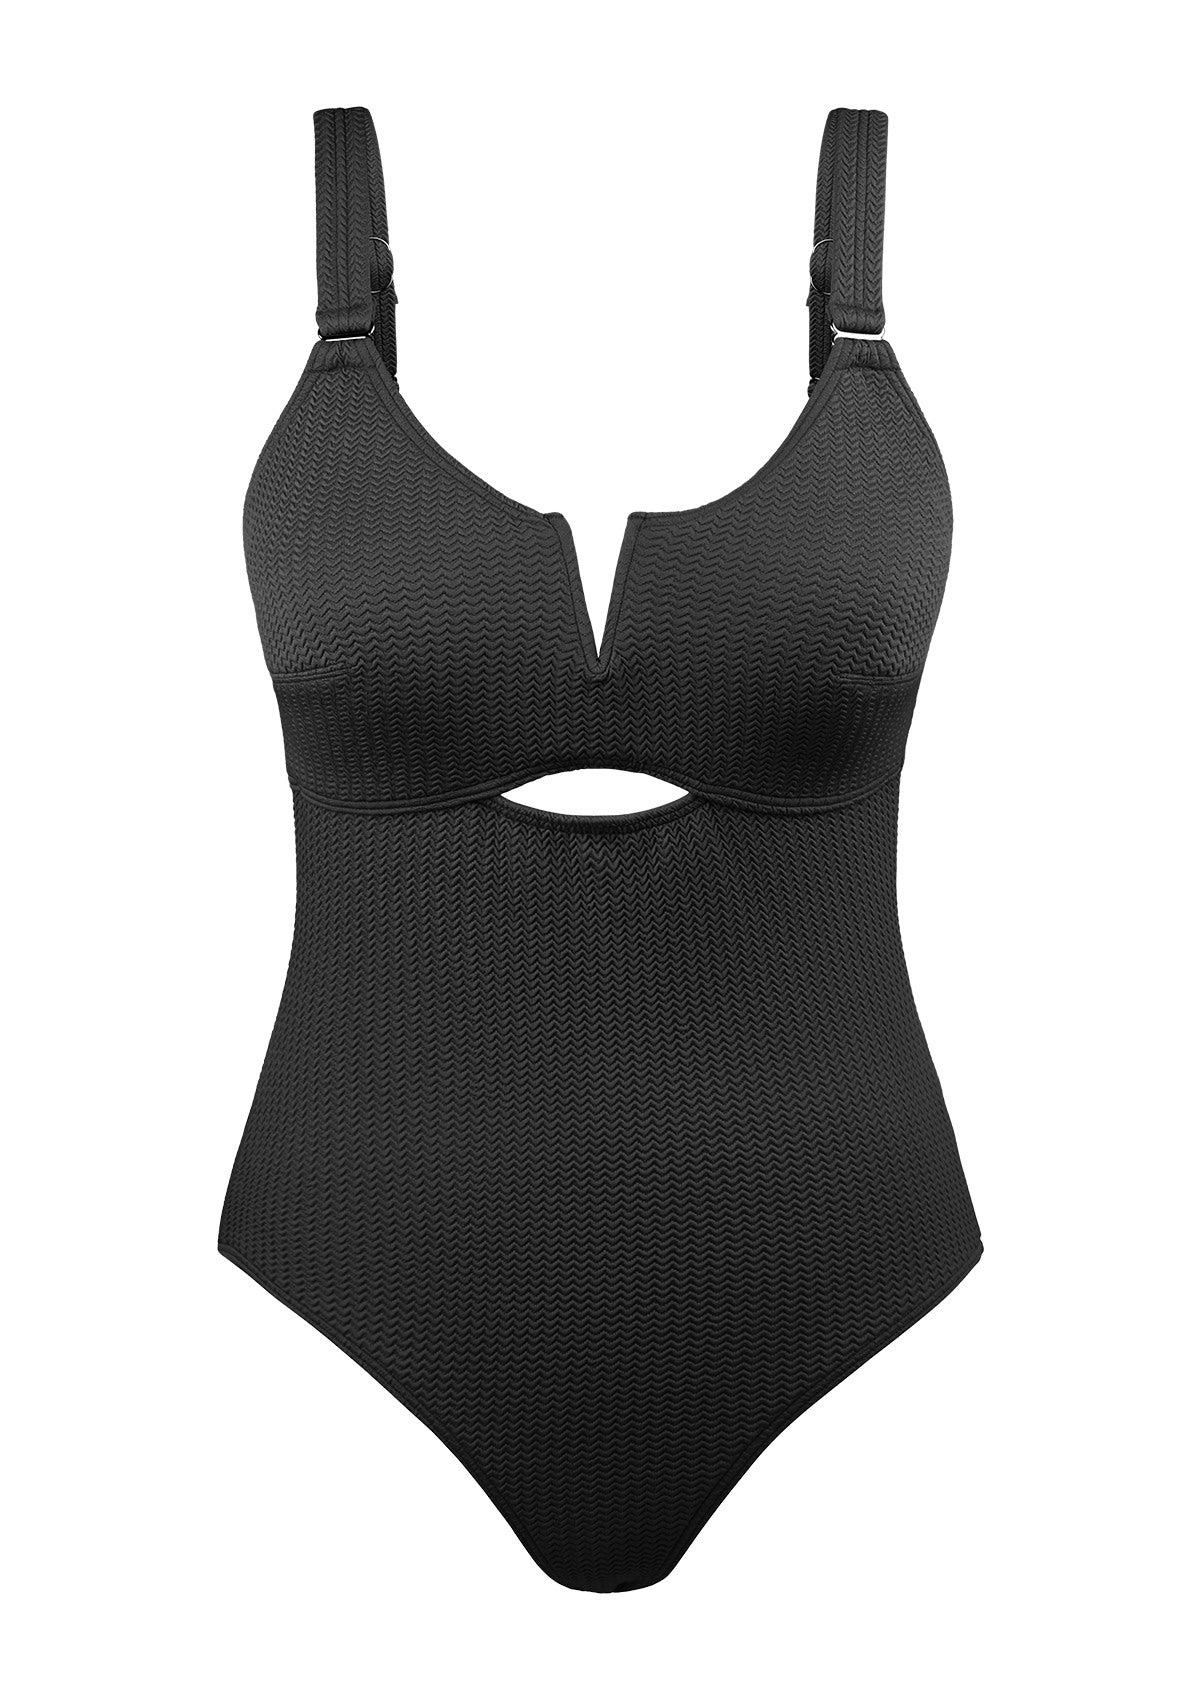 V-wire Plunge Textured One-piece Cutout Swimsuit - 3XL / Black